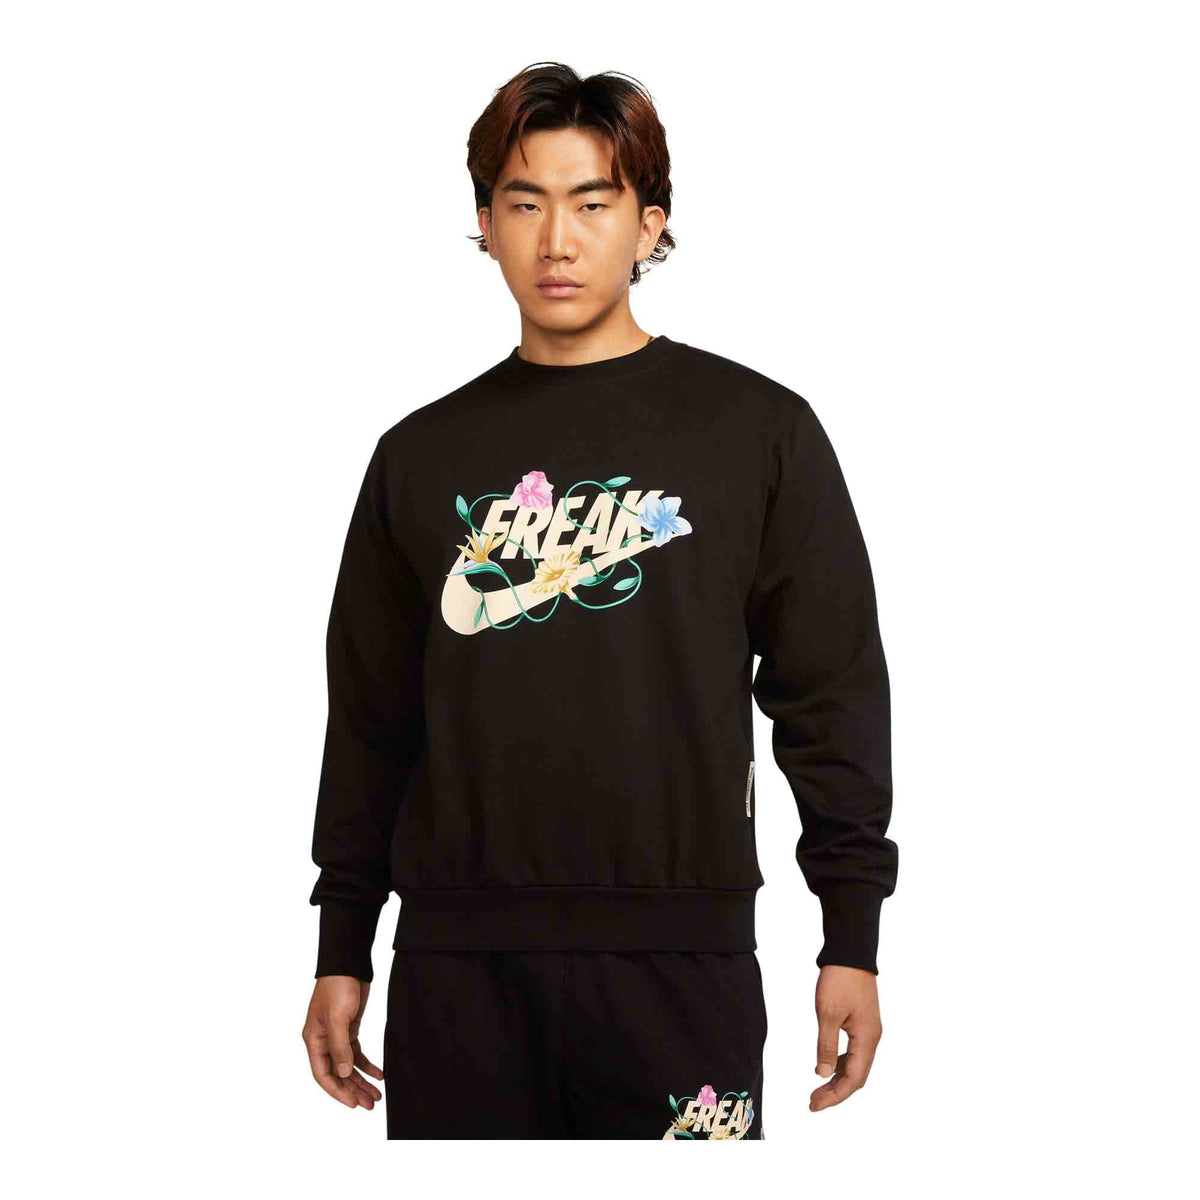 Giannis Standard Issue Men's Graphic Basketball Crew